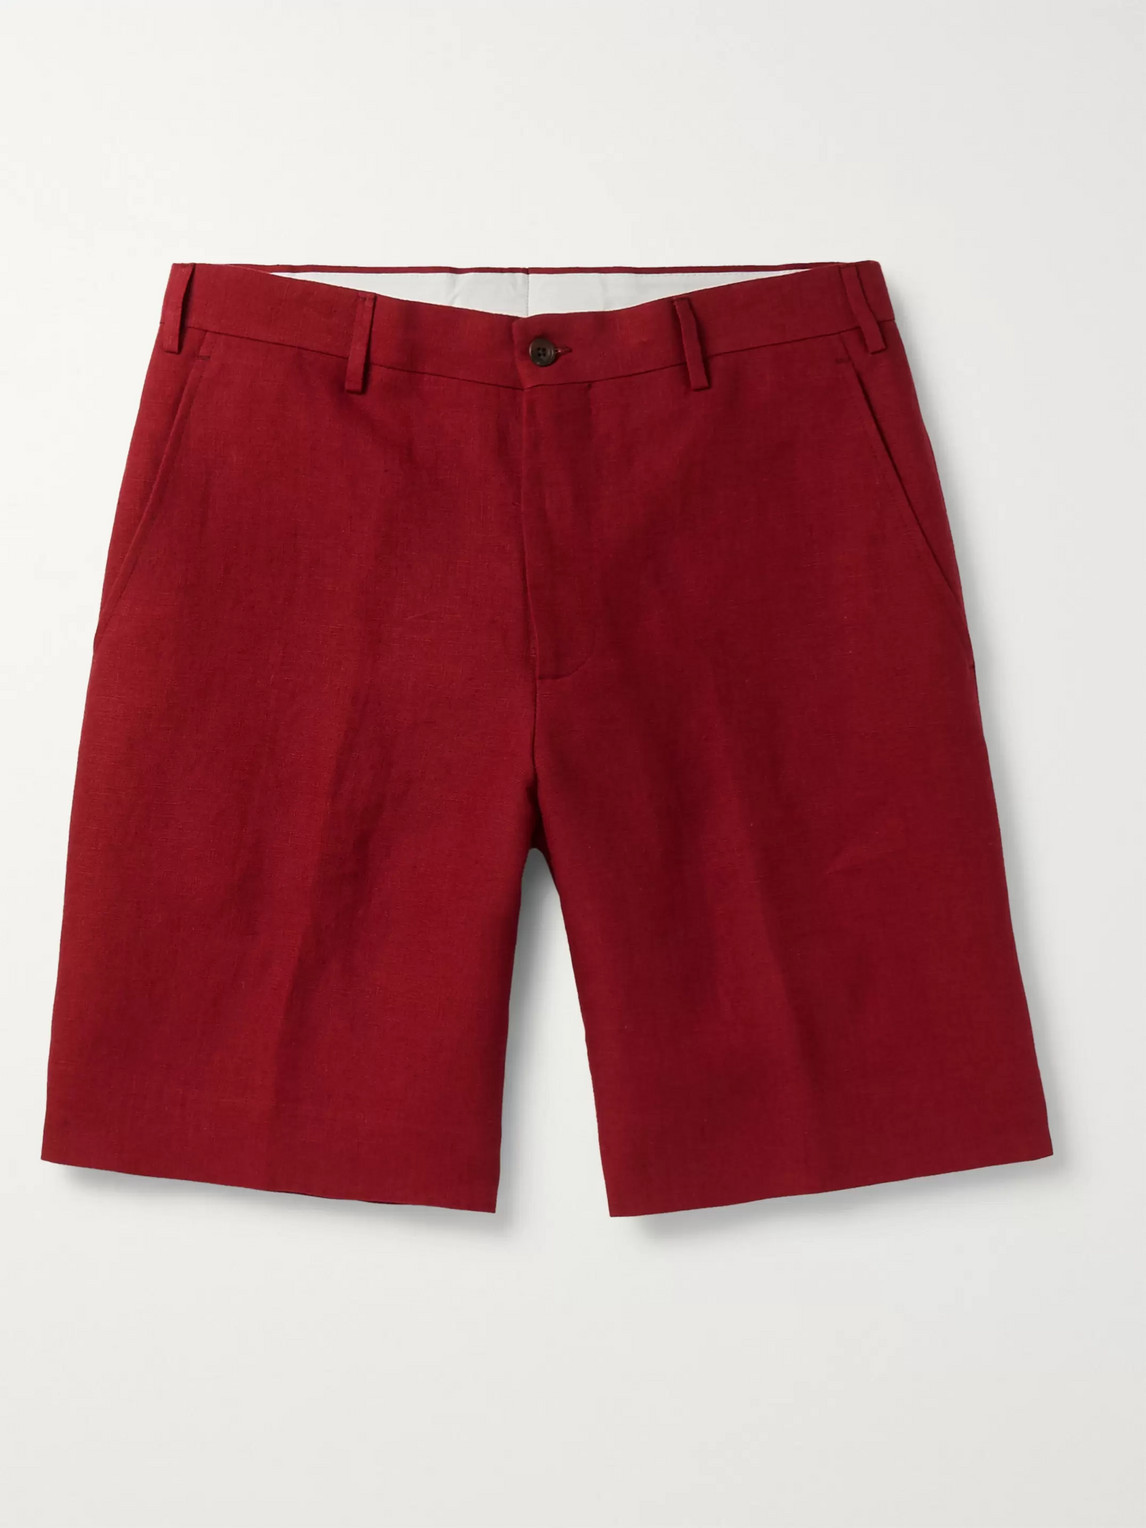 Anderson & Sheppard Linen Shorts In Burgundy